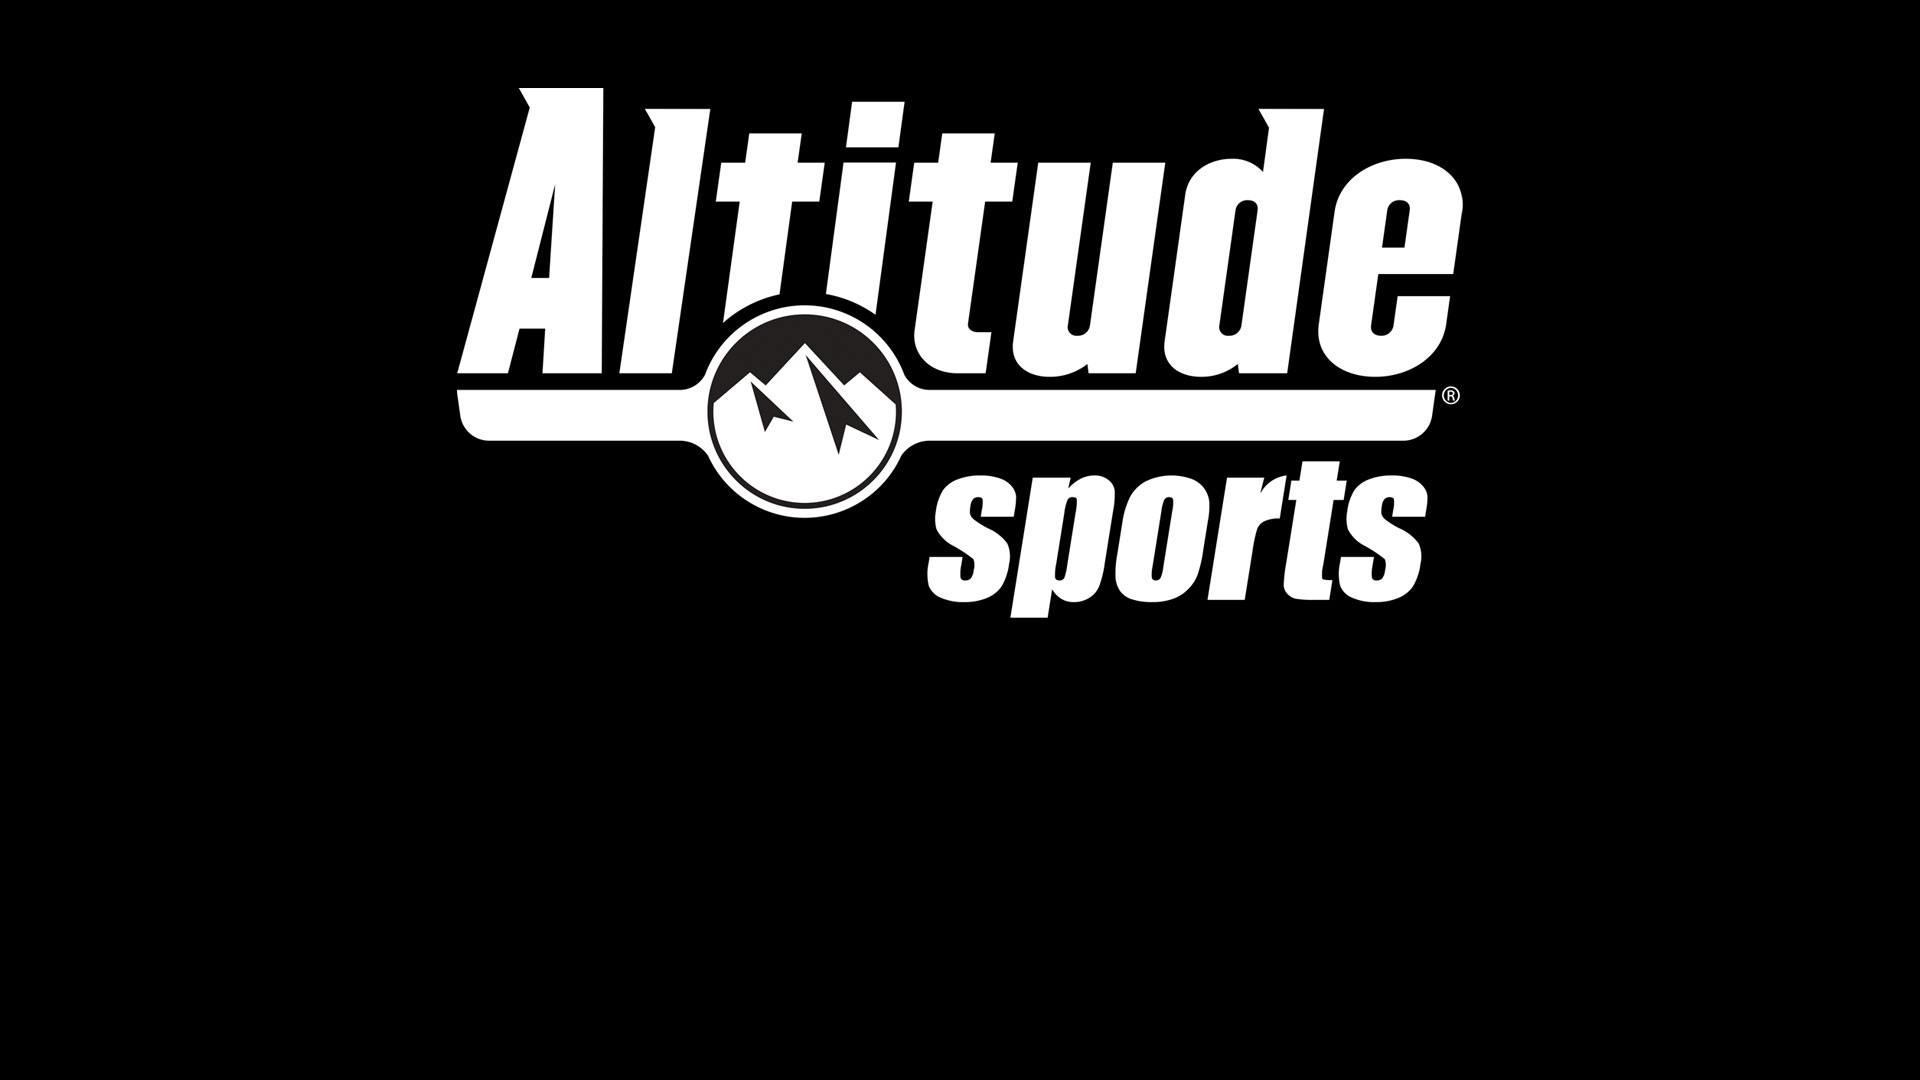 Altitude Sports reaches an agreement with DIRECTV - Altitude Sports